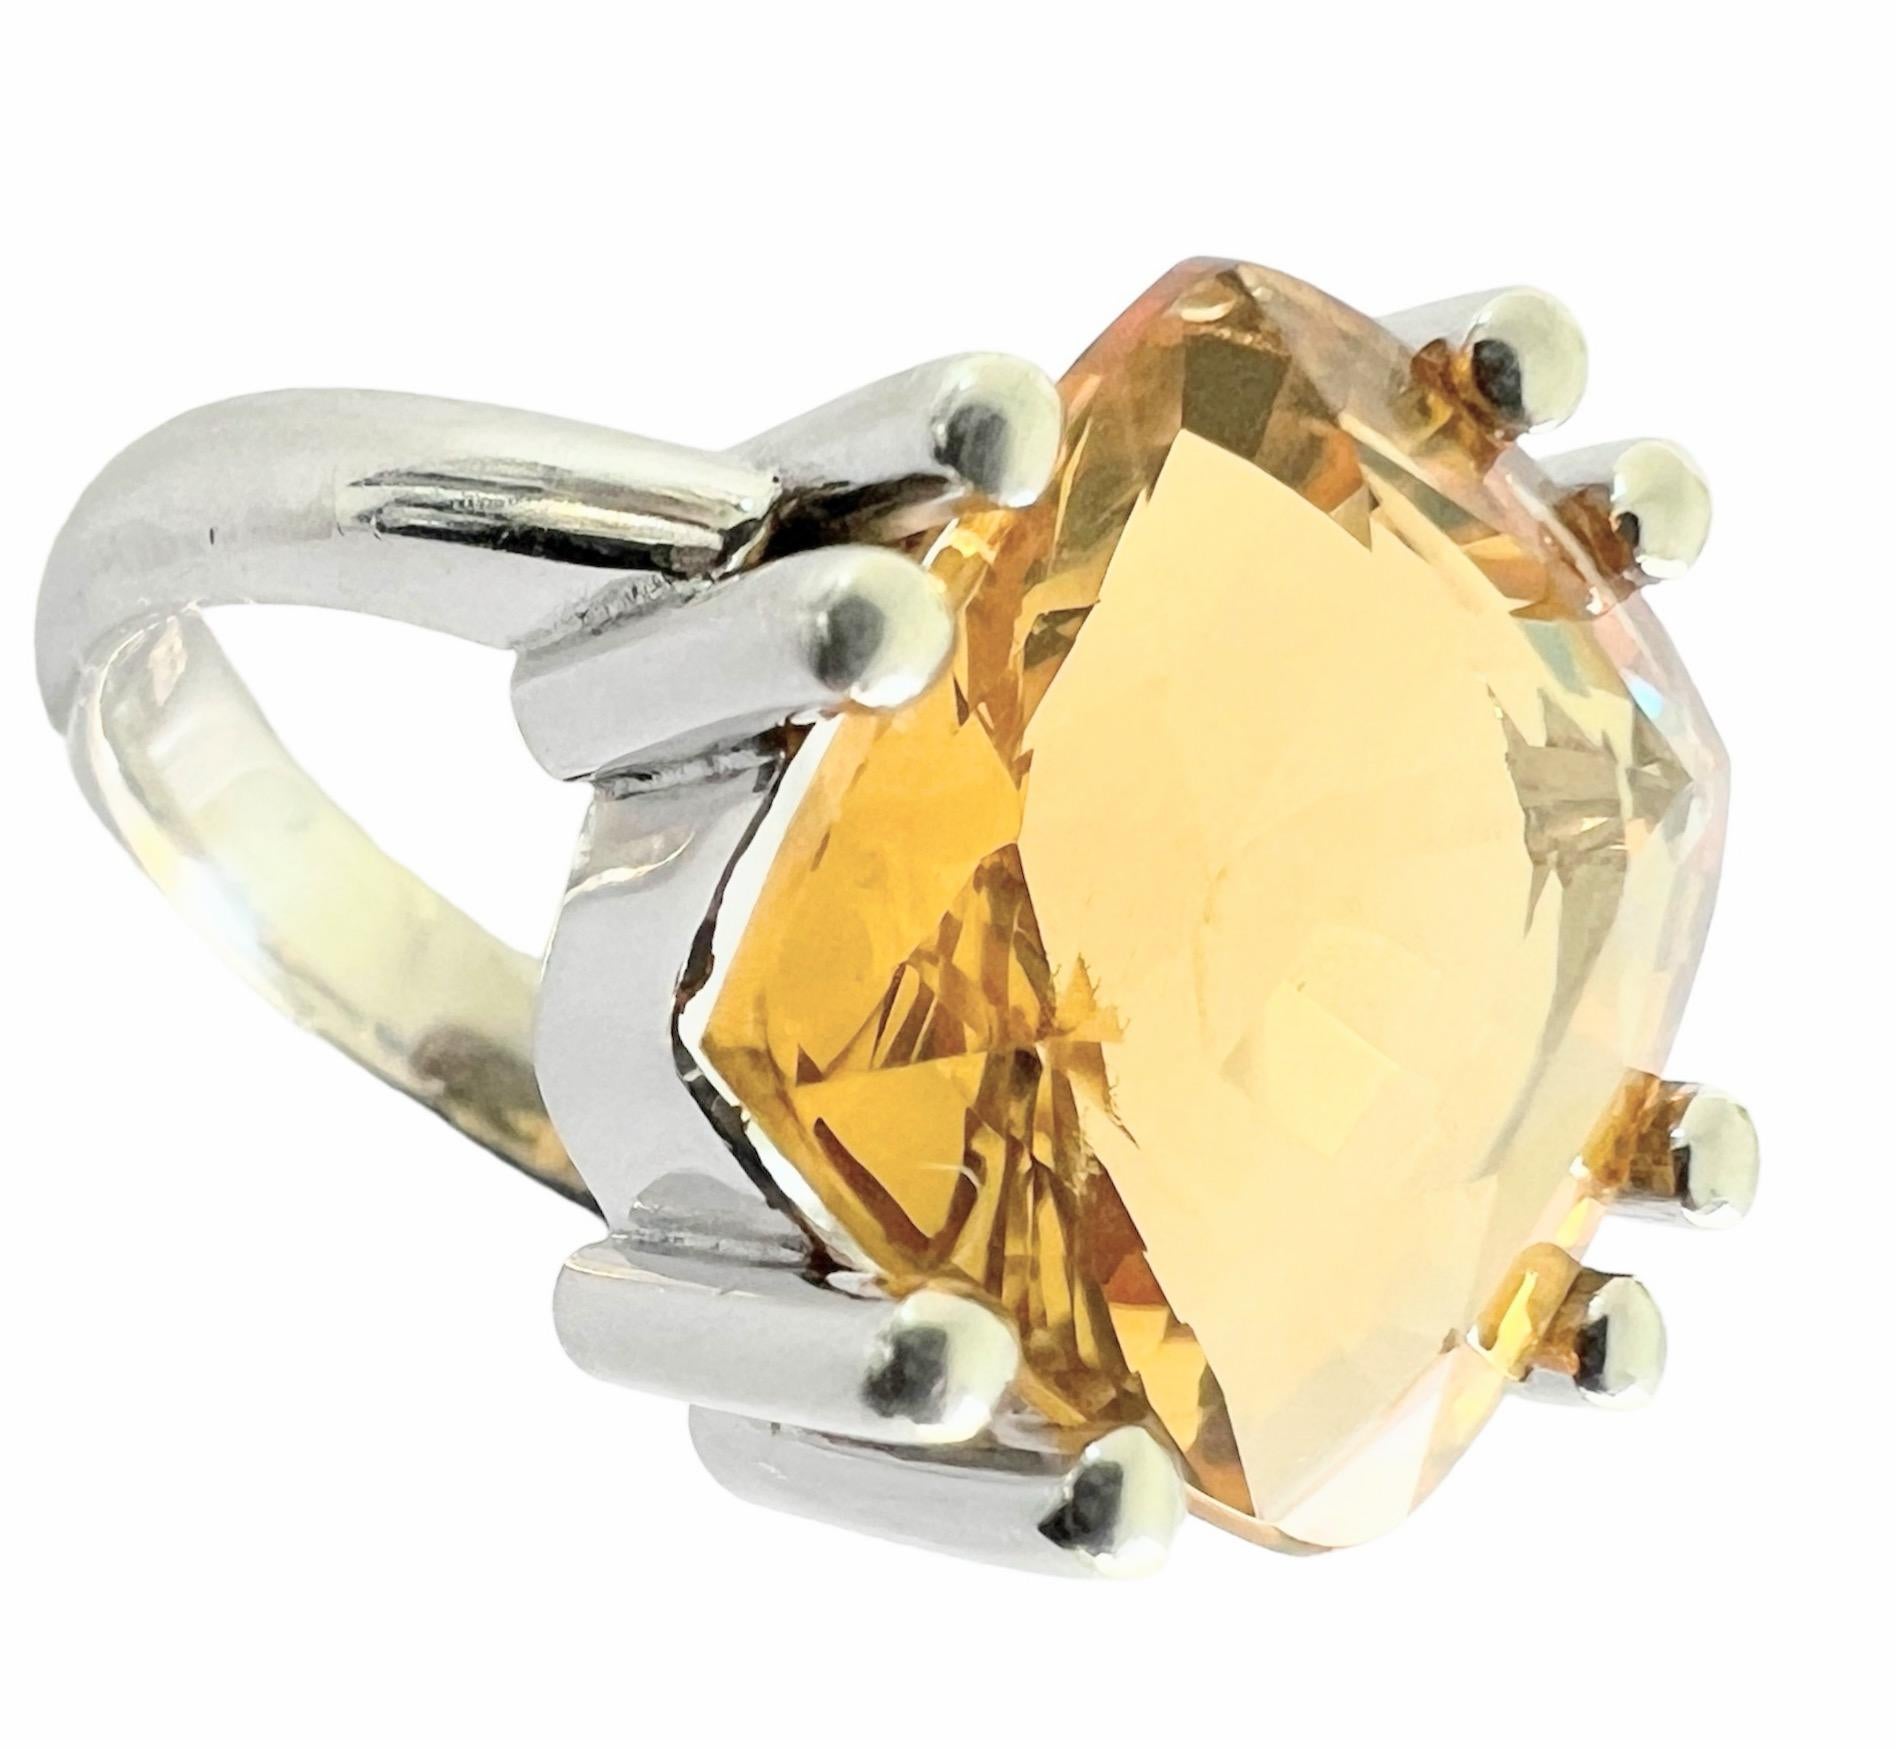 Indulge in the warmth of golden hues with our exquisite 6ct Cushion Cut Natural Unheated Citrine Ring. Crafted to perfection and set in a prong setting. 
Key Features:
Gemstone: A stunning 6ct Round Cushion Natural Unheated Citrine, known for its